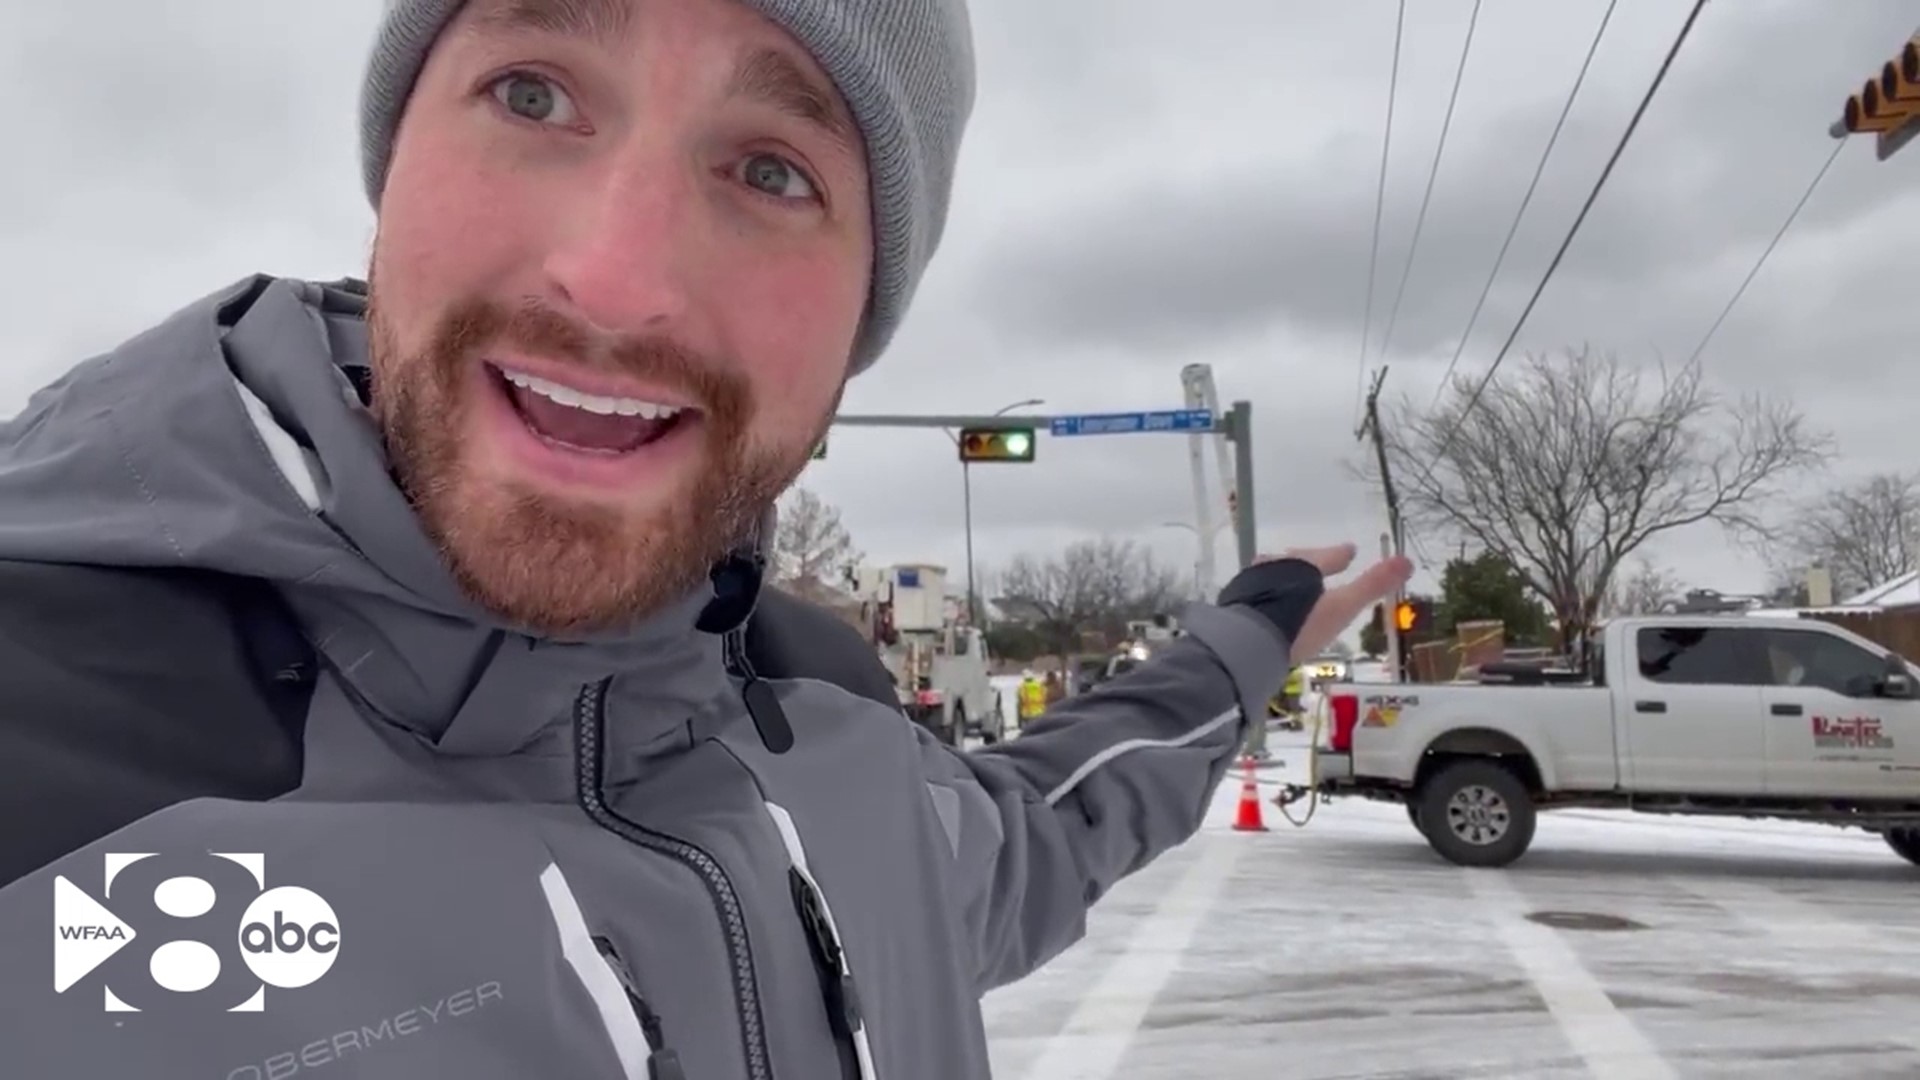 How much did this winter storm affect the North Texas area? Our reporters give you a look into what they saw while out on the field.